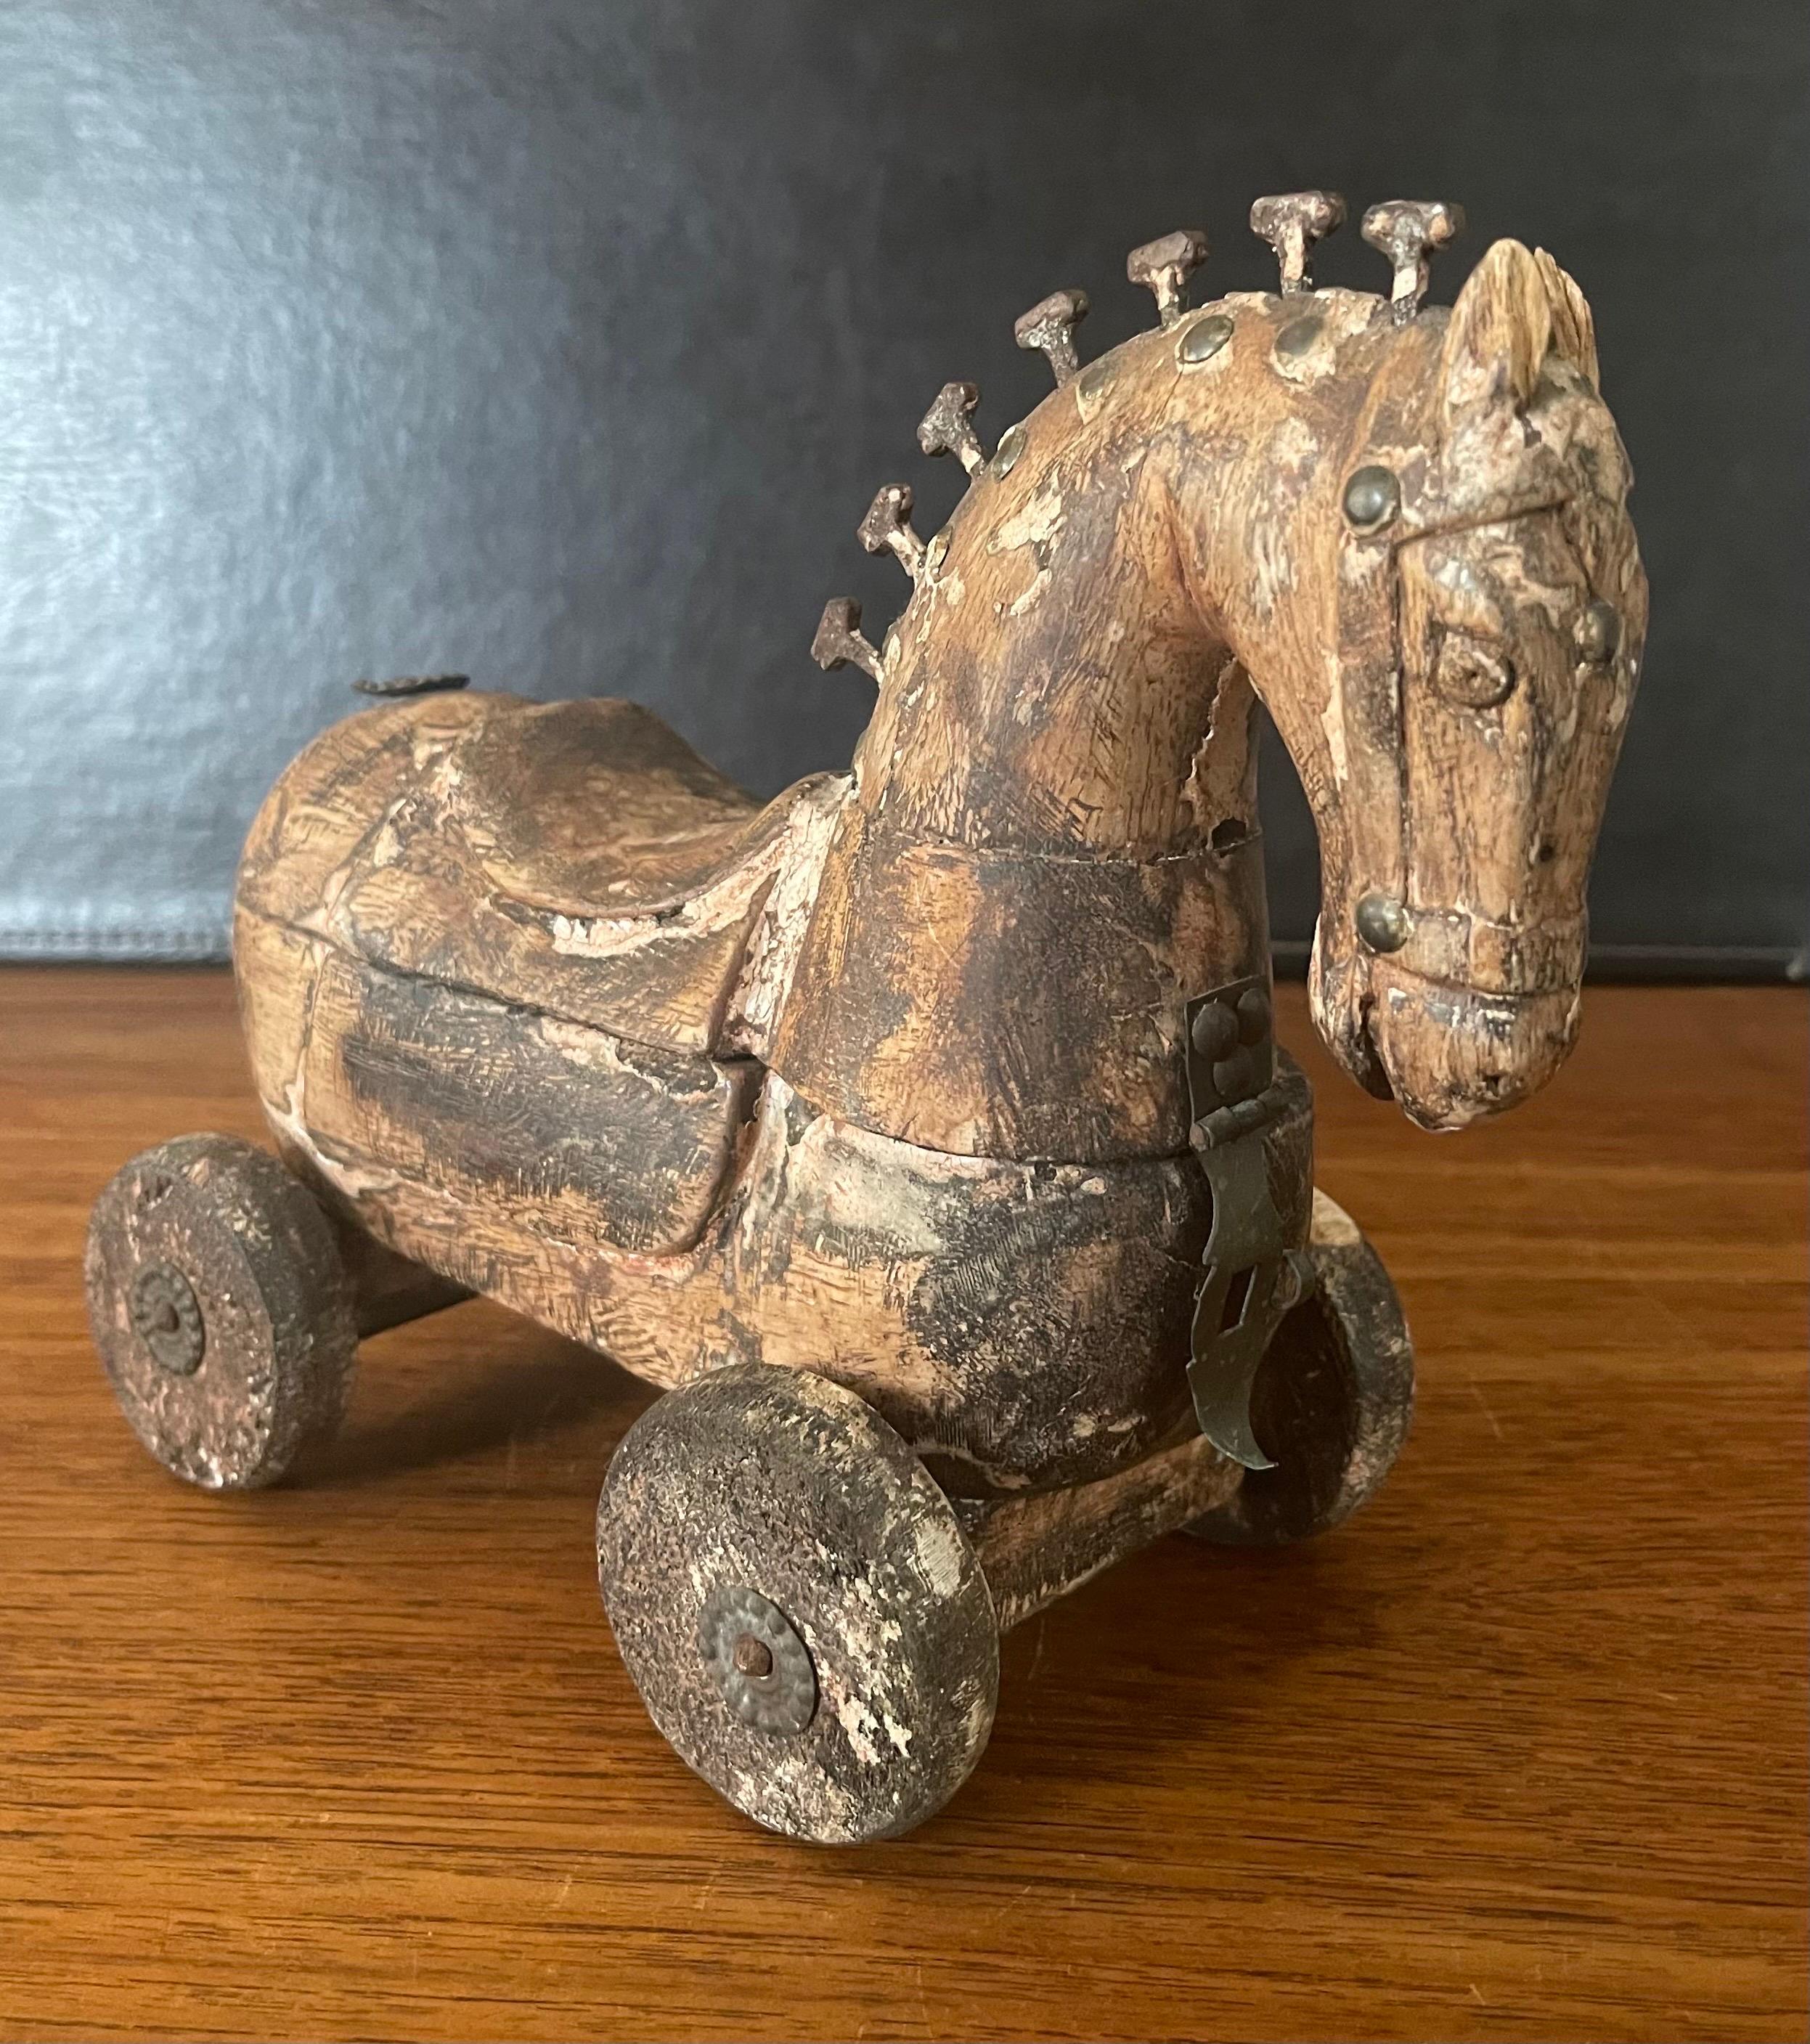 Antique wooden horse pull toy on wheels, circa 1930s. The piece has a latch in the front that allows you to rotate the top portion open to a hidden storage compartment. The horse is hand carved wood and the mane is made ot 